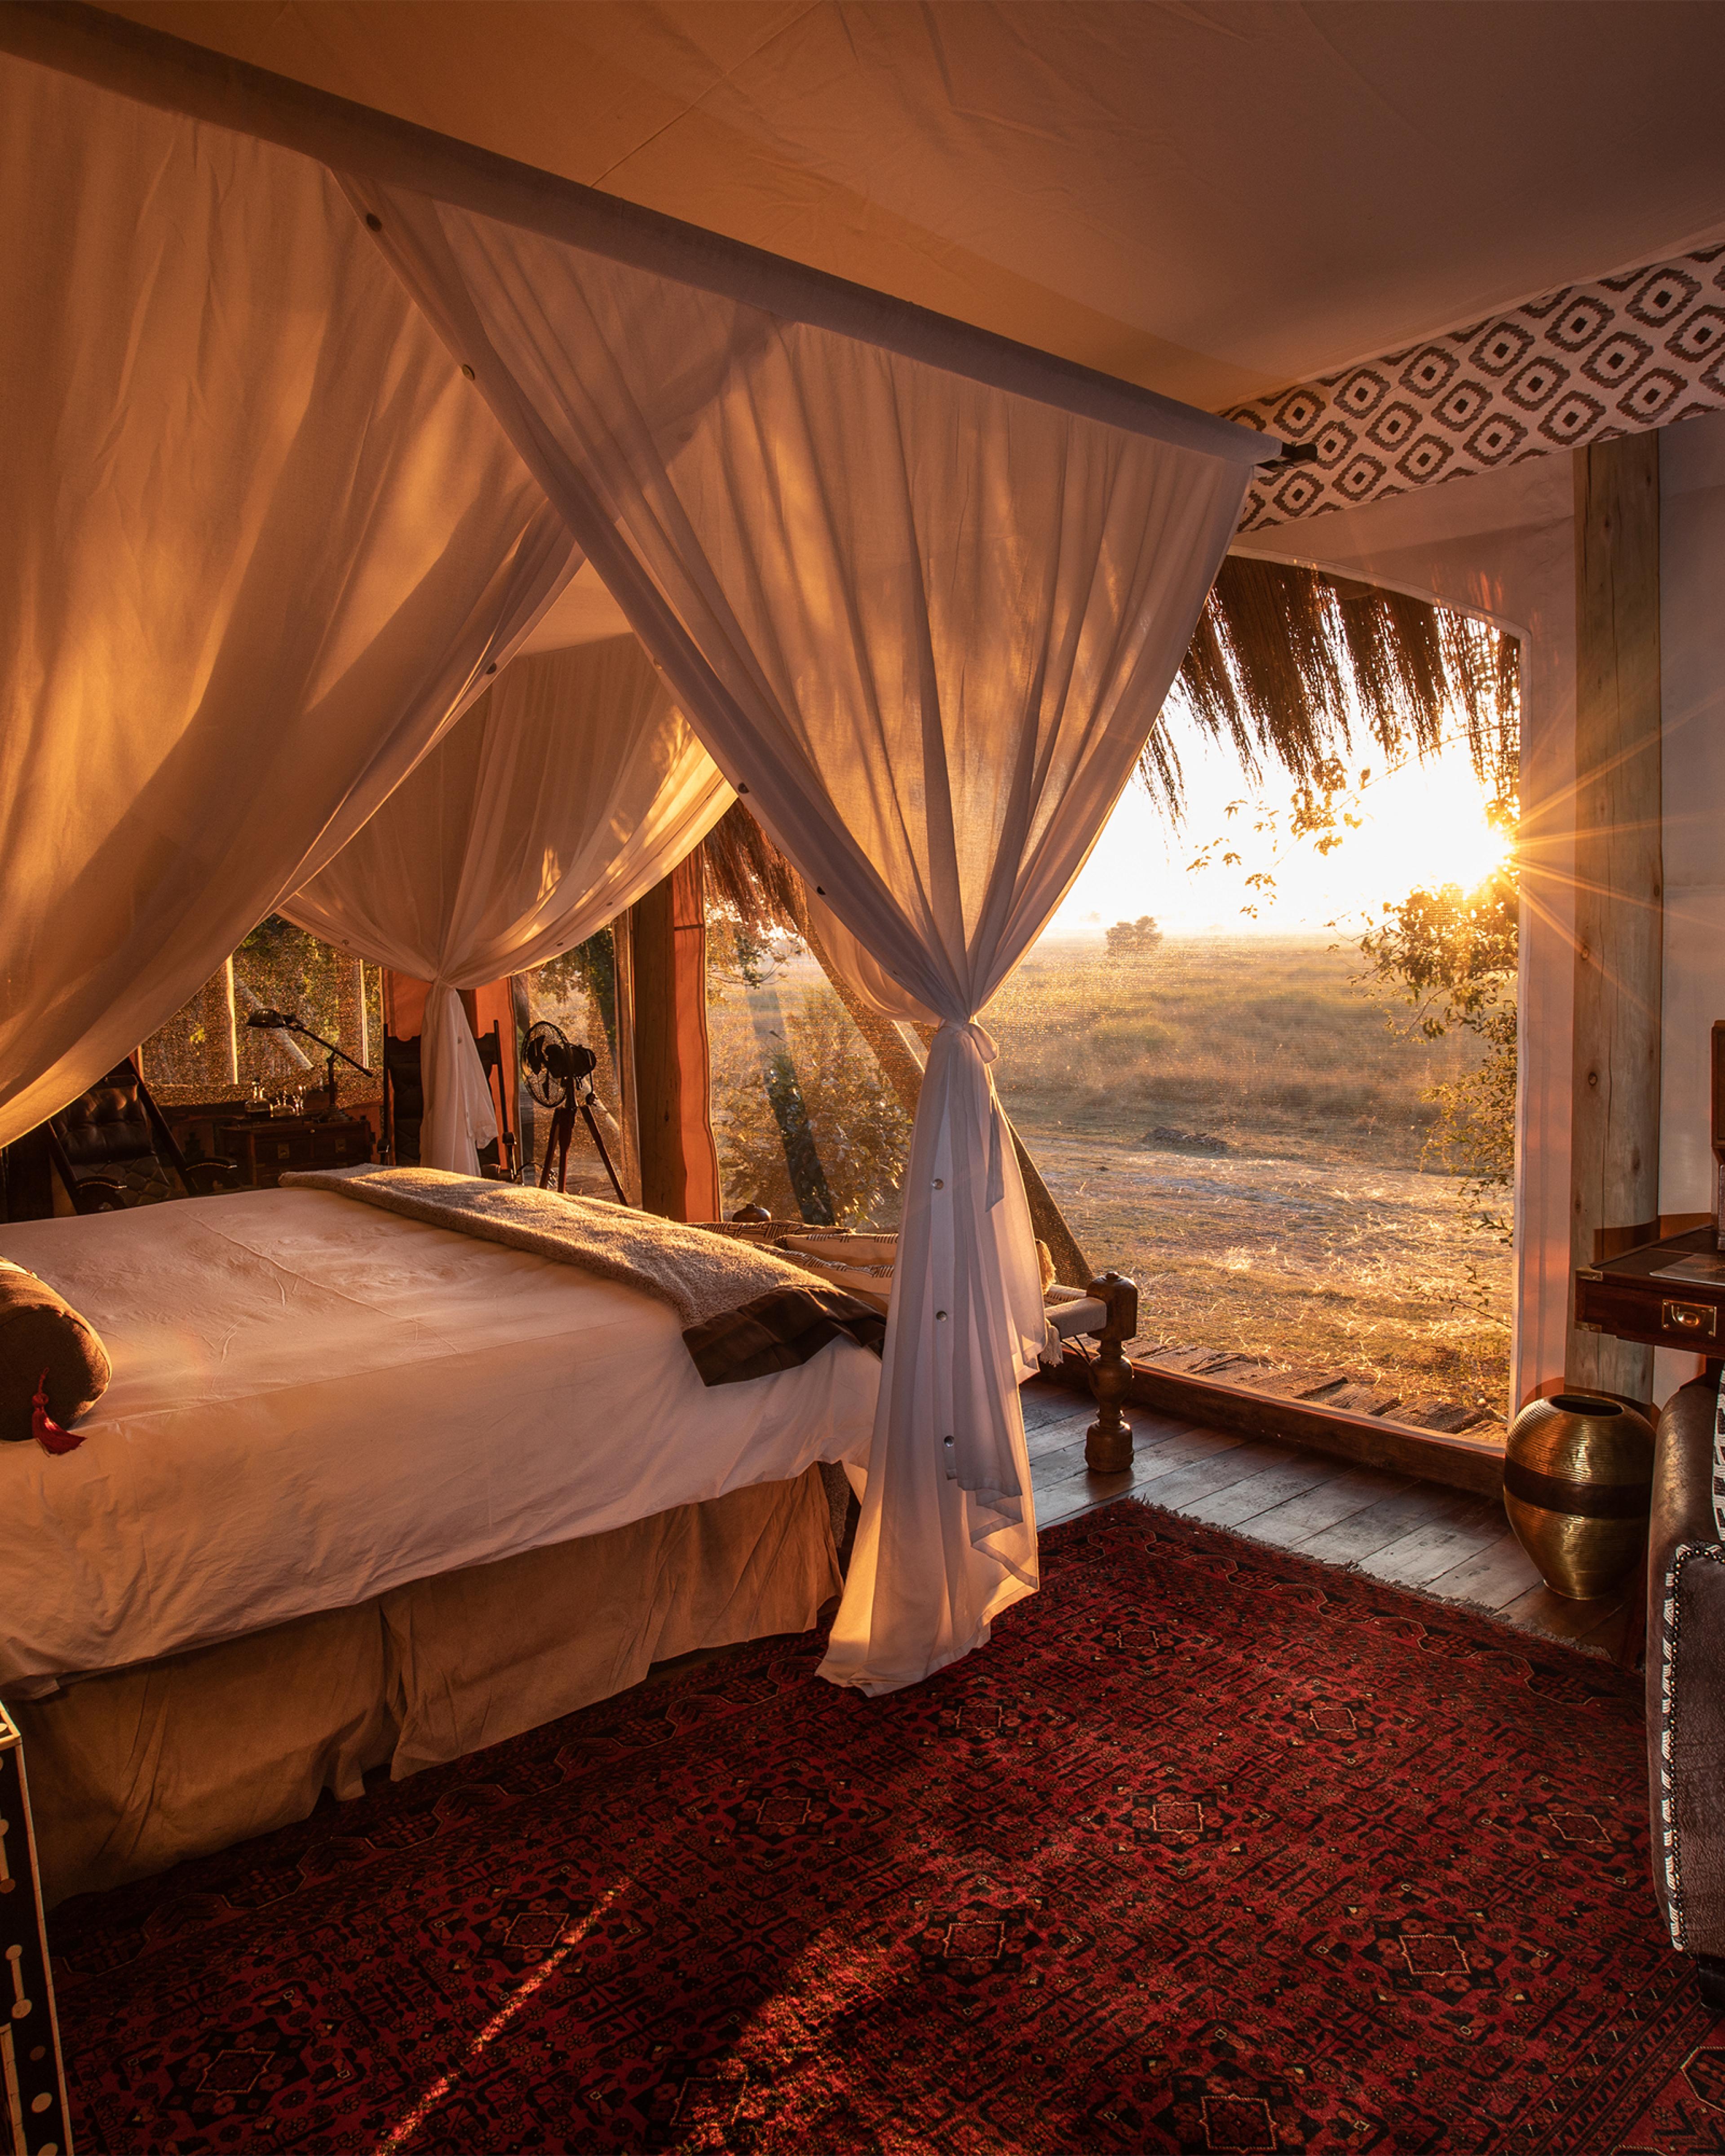 safari tent with bed on left and sunset viewed through window in canvas wall on right